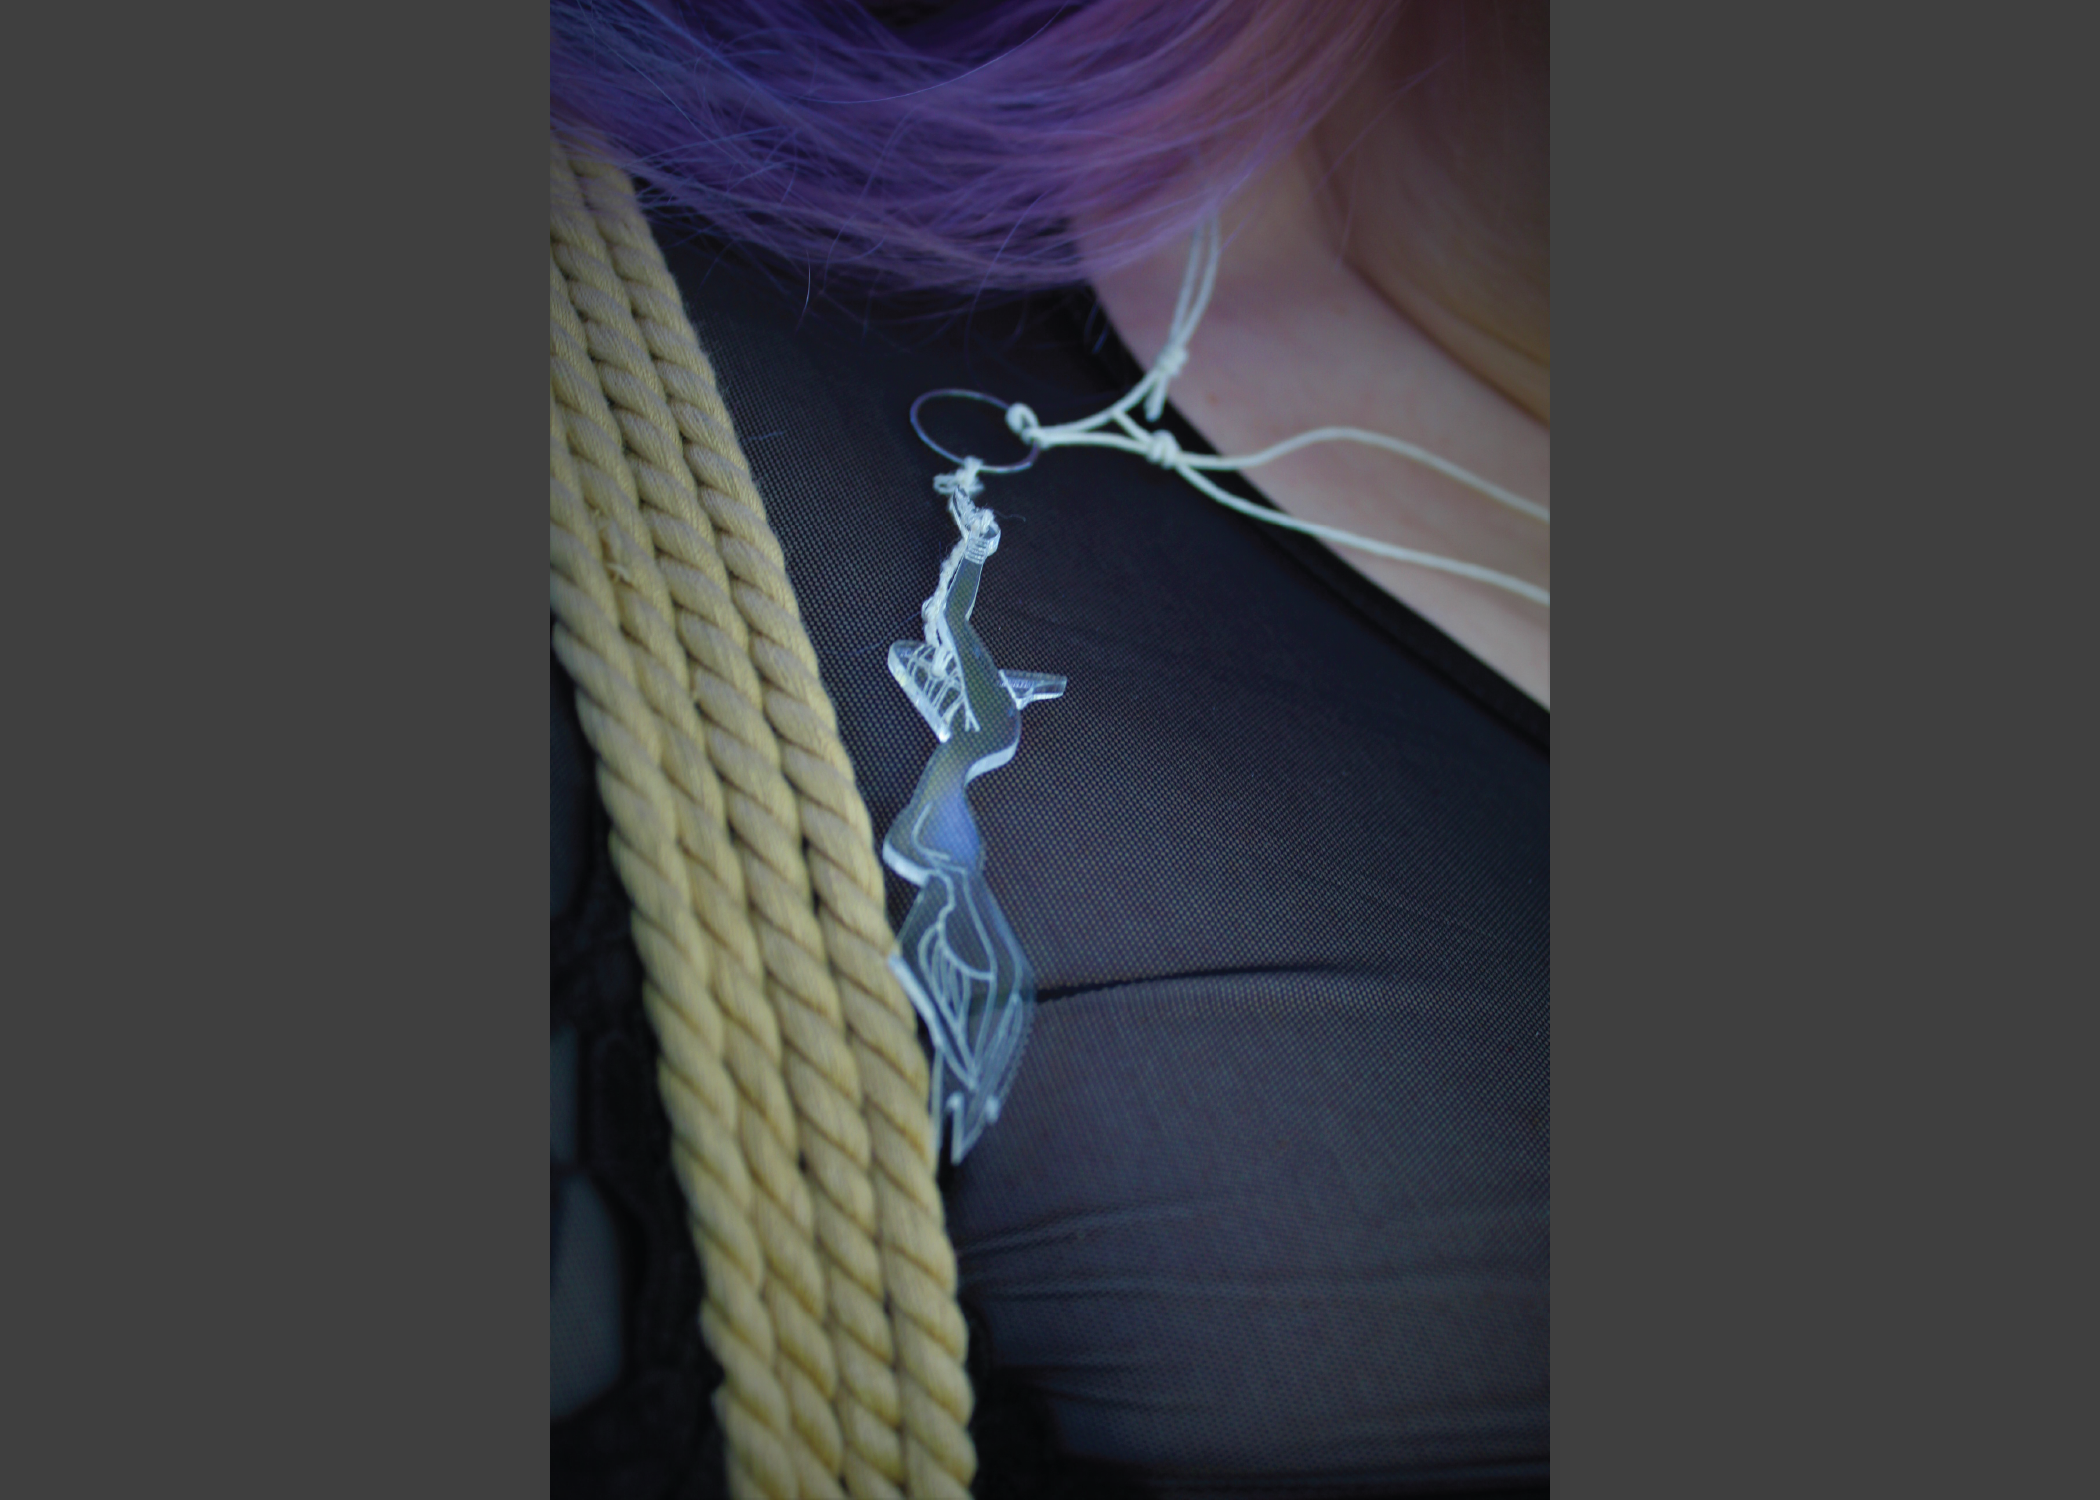 Close up of an acrylic necklace, laser engraved, cut like a women in a self-suspension. Woman necklace piece tied in a futo and gravity boot hanging from her legs, arms and hair falling limp above her.